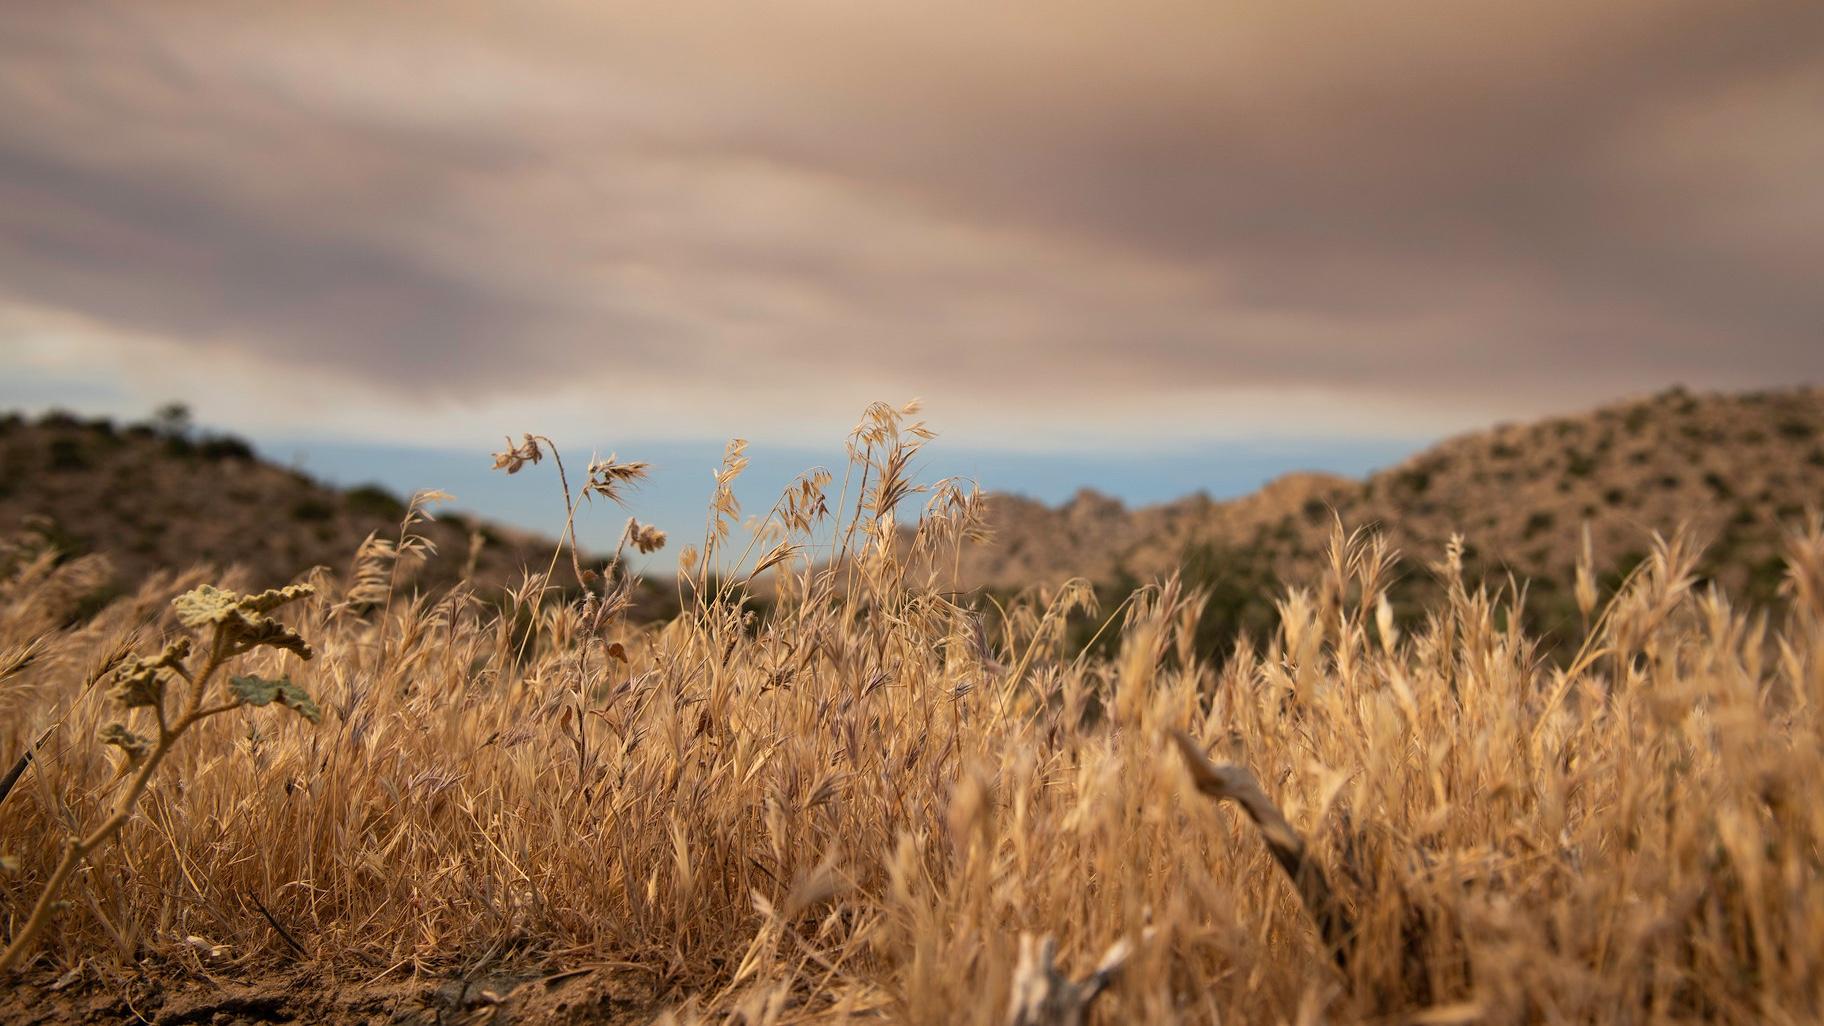 Invasive cheatgrass, shown in the foreground, is fueling wildfires in the western U.S. (National Park Service / Emily Hassel)